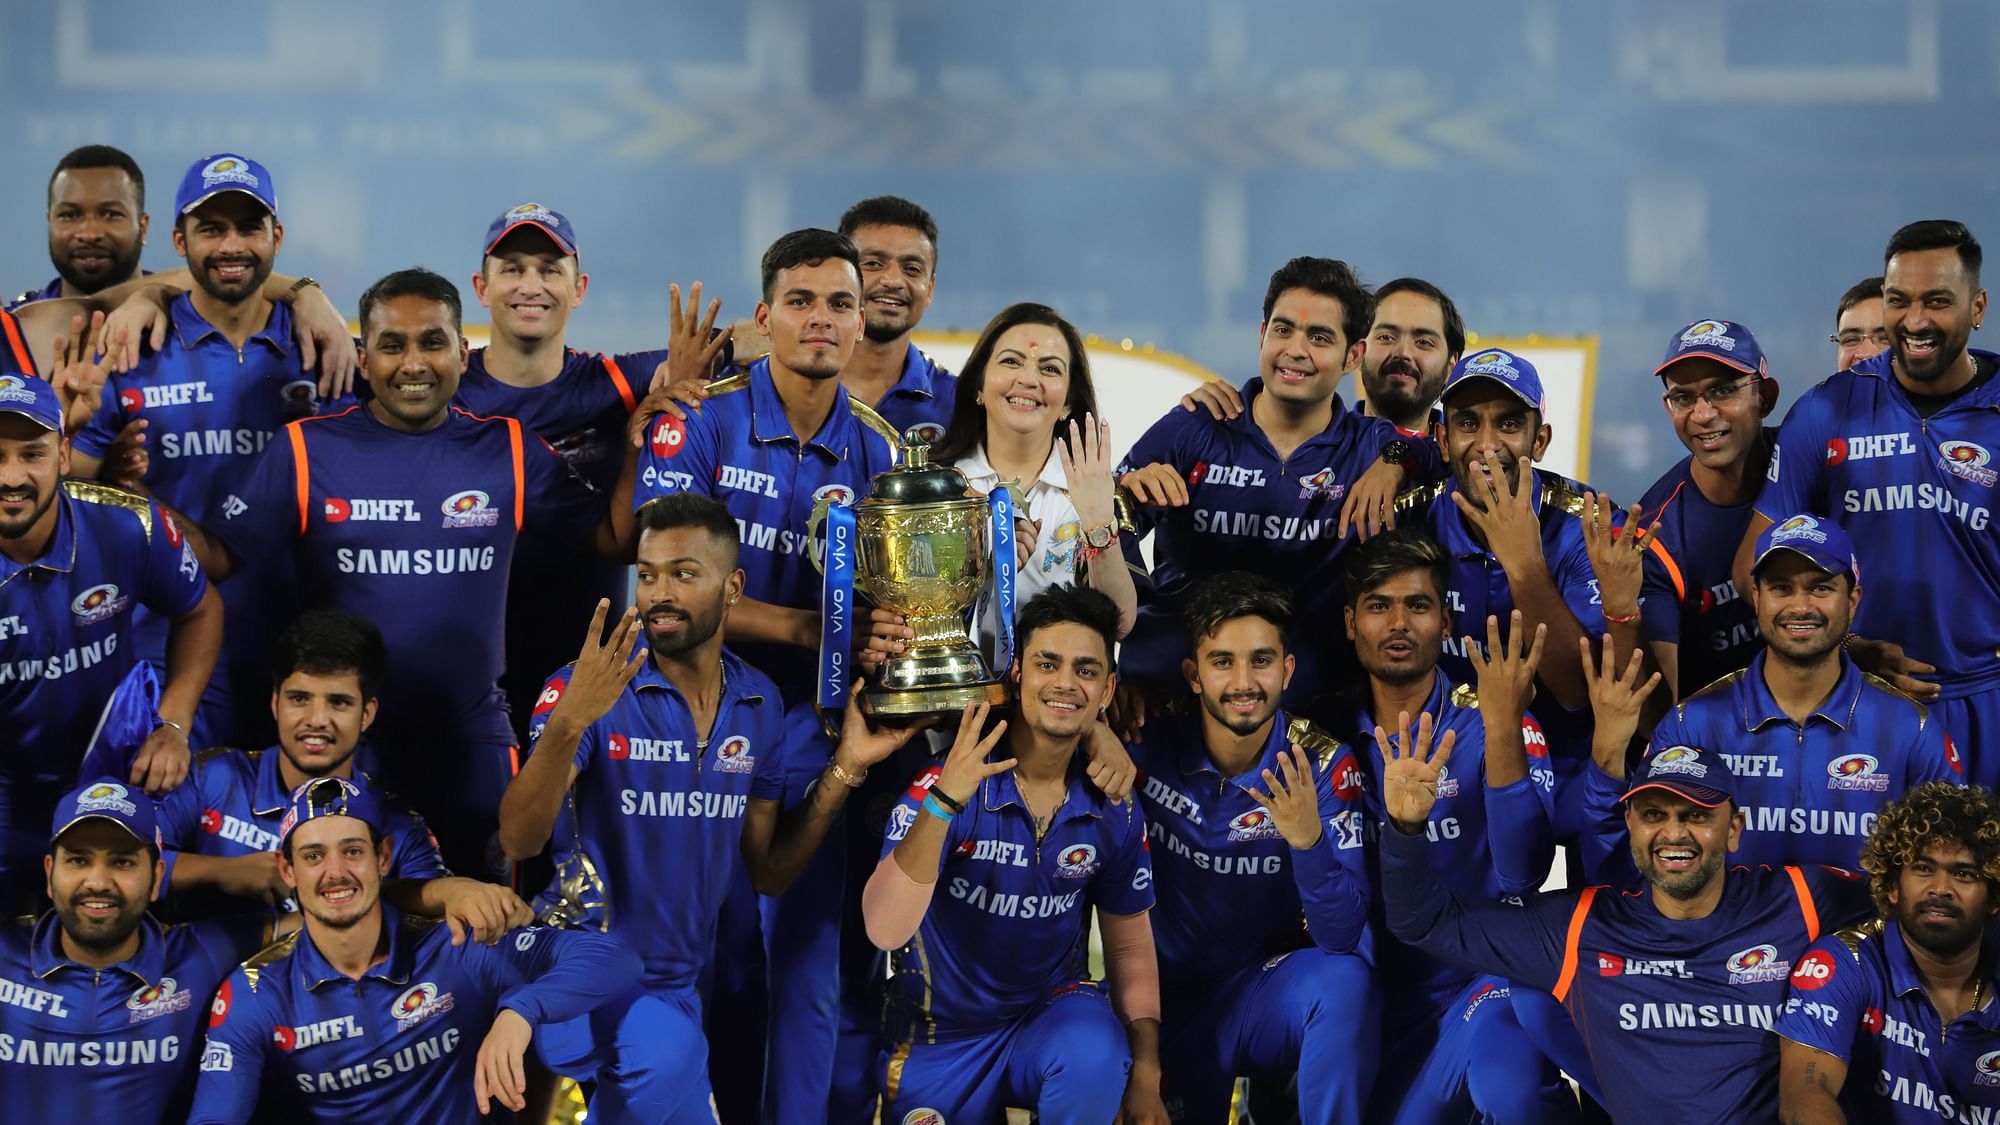 IPL 2022: Indian Premier League becomes MOST VALUED cricket league, FASTEST GROWING sports league with 24% annual growth rate - Check values of all 10 franchises